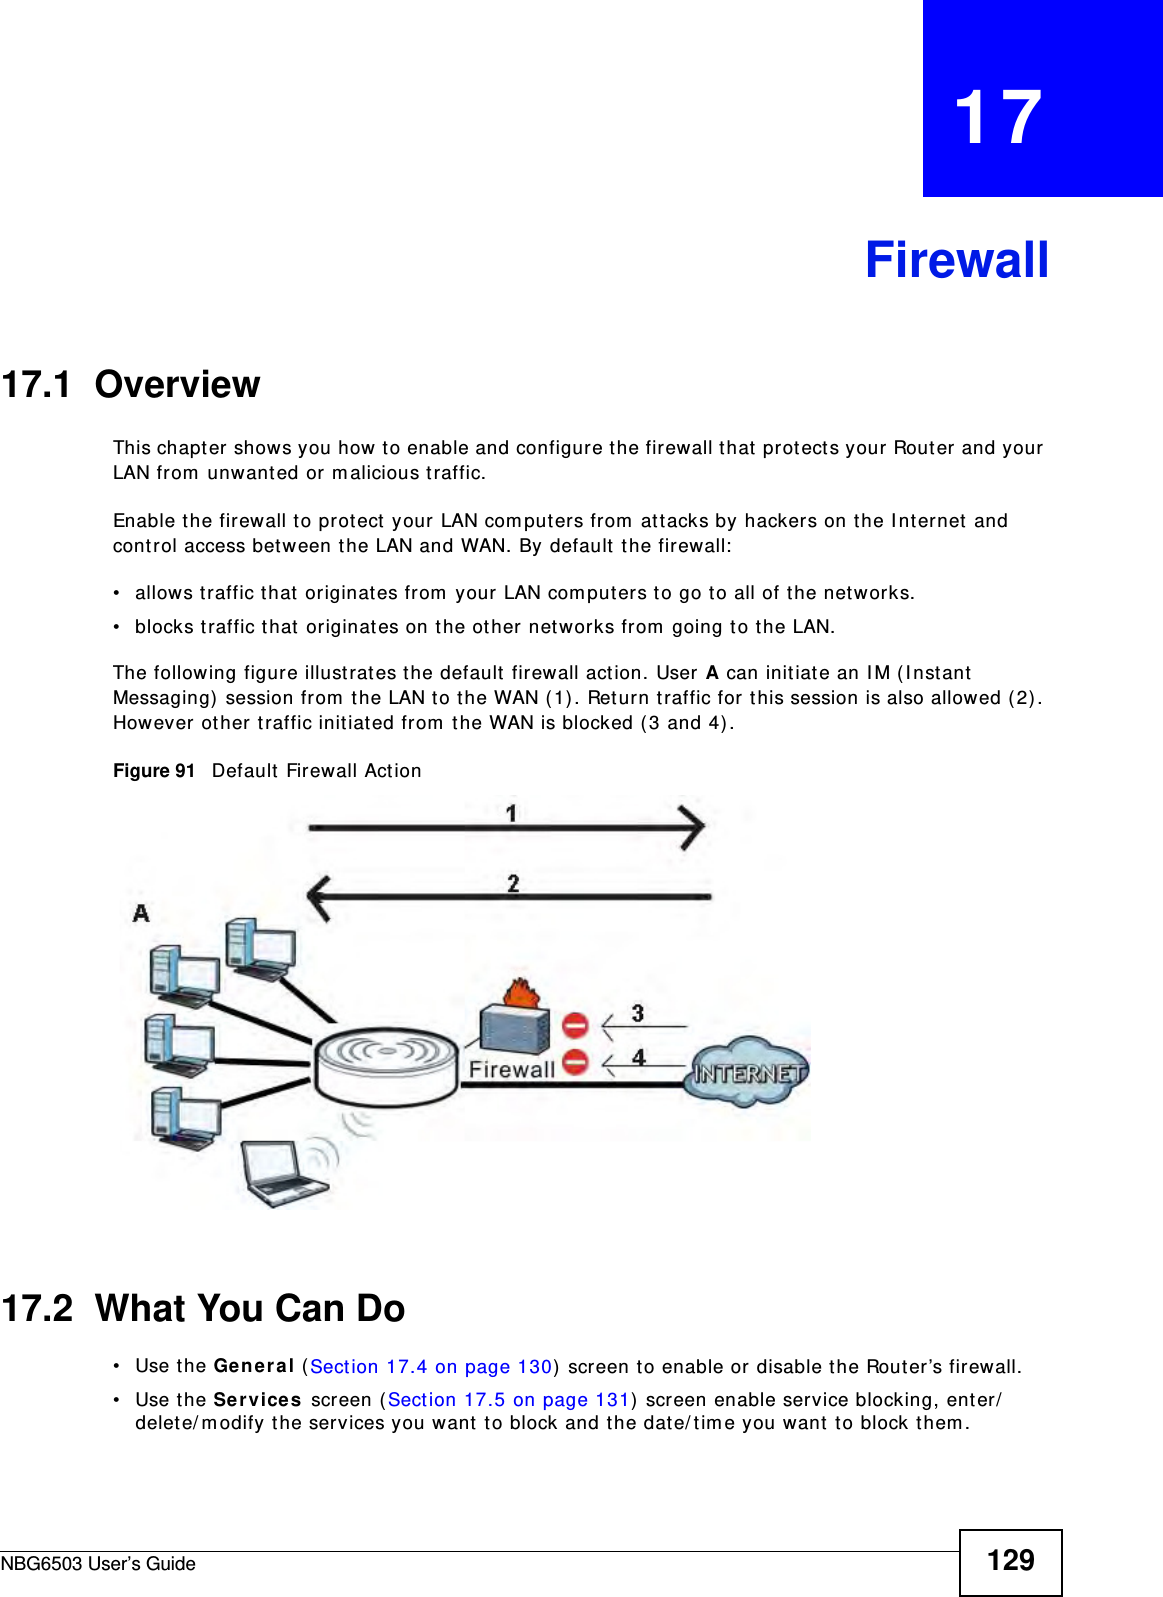 NBG6503 User’s Guide 129CHAPTER   17Firewall17.1  Overview   This chapter shows you how to enable and configure the firewall that protects your Router and your LAN from unwanted or malicious traffic.Enable the firewall to protect your LAN computers from attacks by hackers on the Internet and control access between the LAN and WAN. By default the firewall:• allows traffic that originates from your LAN computers to go to all of the networks. • blocks traffic that originates on the other networks from going to the LAN. The following figure illustrates the default firewall action. User A can initiate an IM (Instant Messaging) session from the LAN to the WAN (1). Return traffic for this session is also allowed (2). However other traffic initiated from the WAN is blocked (3 and 4).Figure 91   Default Firewall Action17.2  What You Can Do•Use the General (Section 17.4 on page 130) screen to enable or disable the Router’s firewall.•Use the Services screen (Section 17.5 on page 131) screen enable service blocking, enter/delete/modify the services you want to block and the date/time you want to block them. 